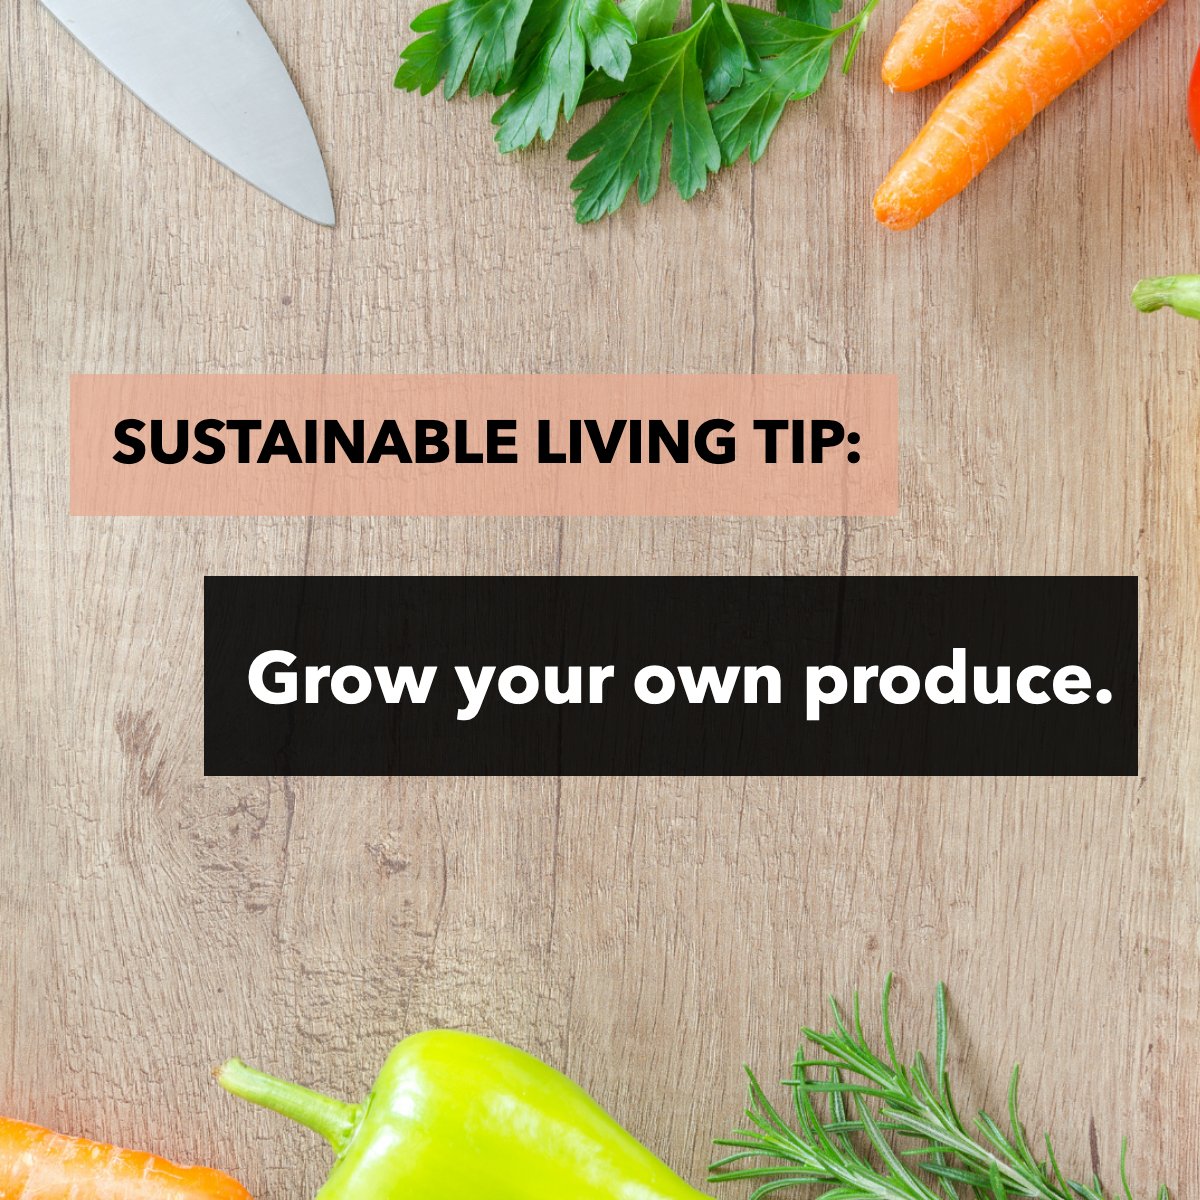 Do you cultivate some of your vegetables or food 🍅?  This is not only healthier but extremely sustainable! 

#sustainablelifestyle #sustainable #sustainablity #sustainablefood